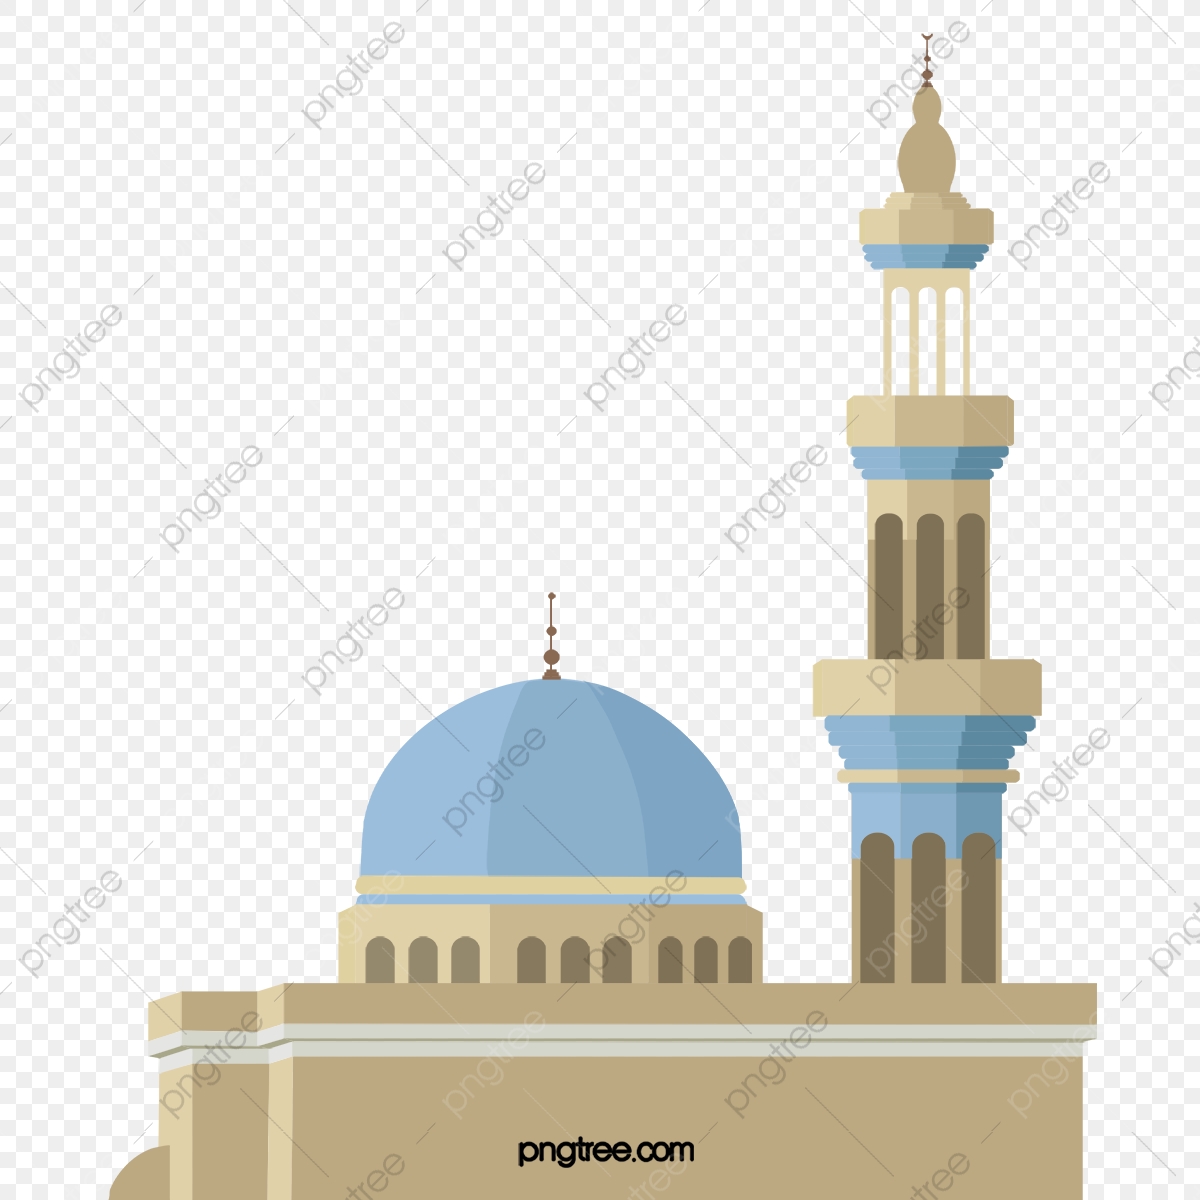 Mosque clipart flat. Wind islamic islamism style